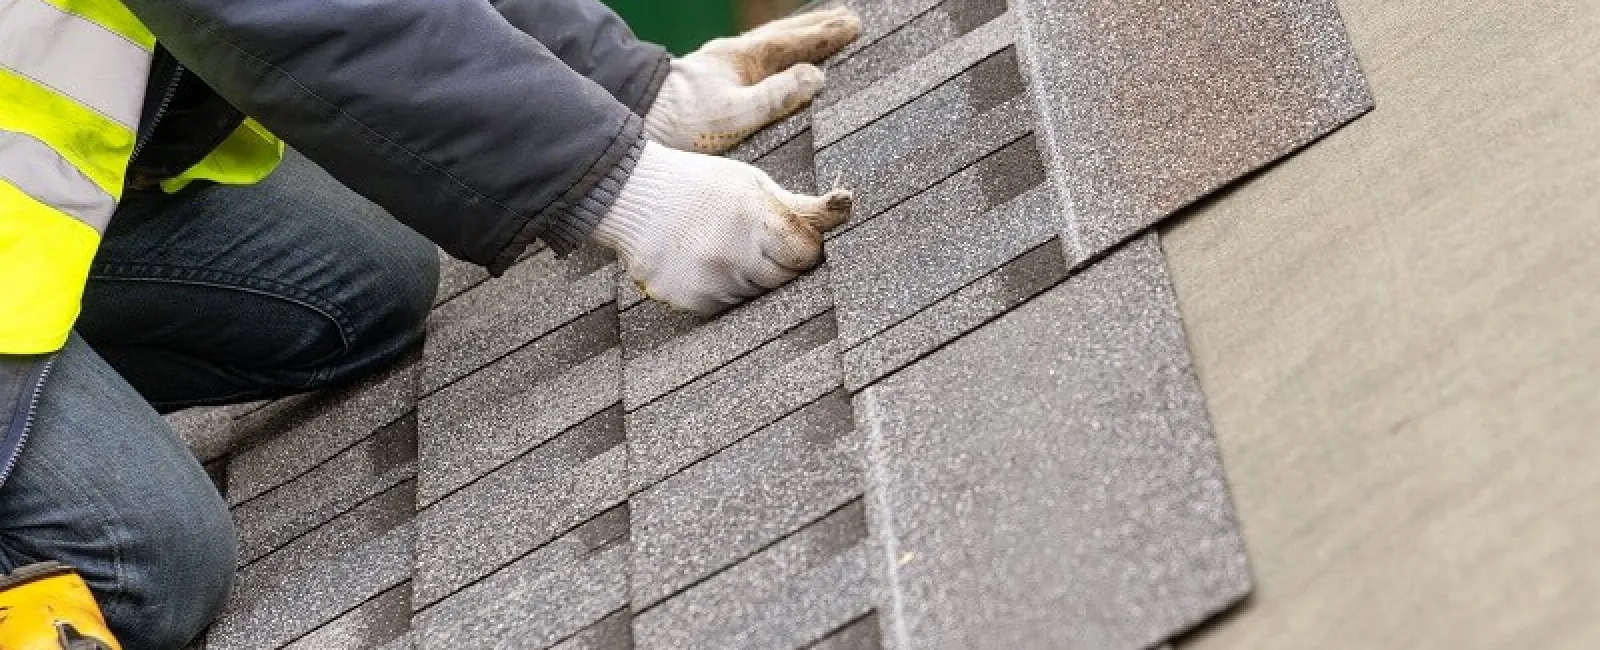 What Is the Best Way to Roof a House?